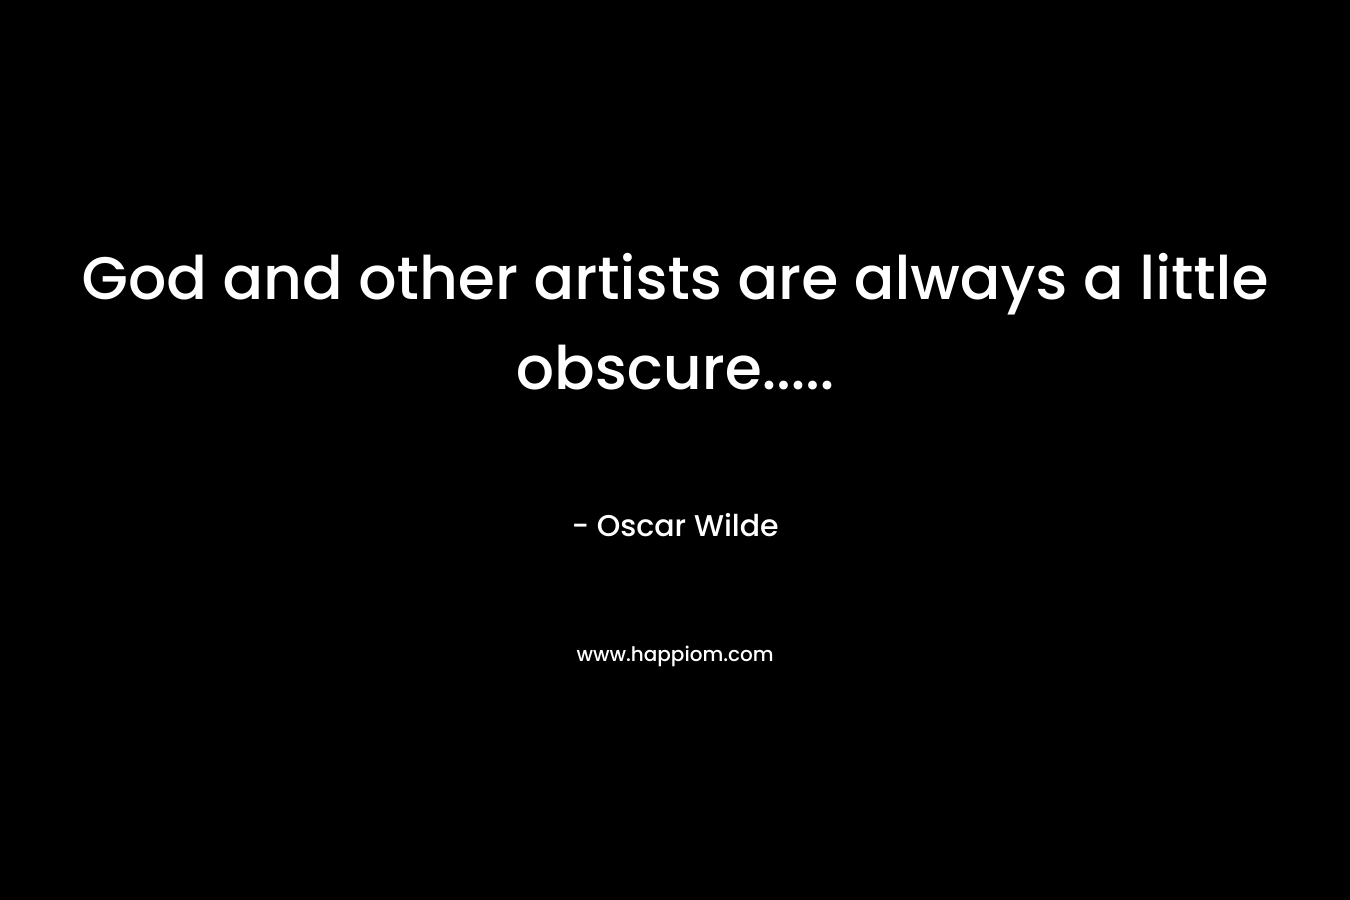 God and other artists are always a little obscure.....